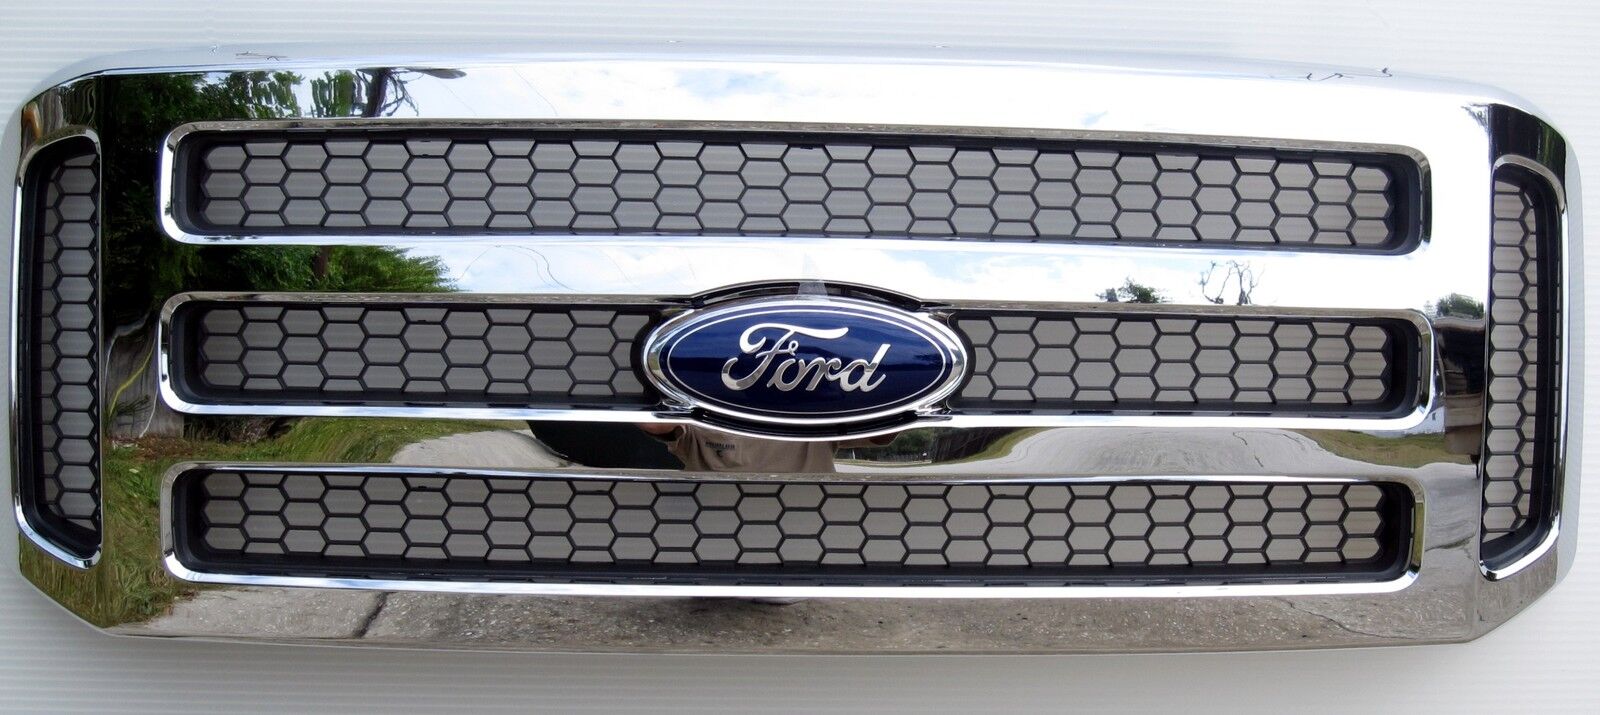 2005- 07 Ford CHROME Grille Grill F250 F450 & Excursion